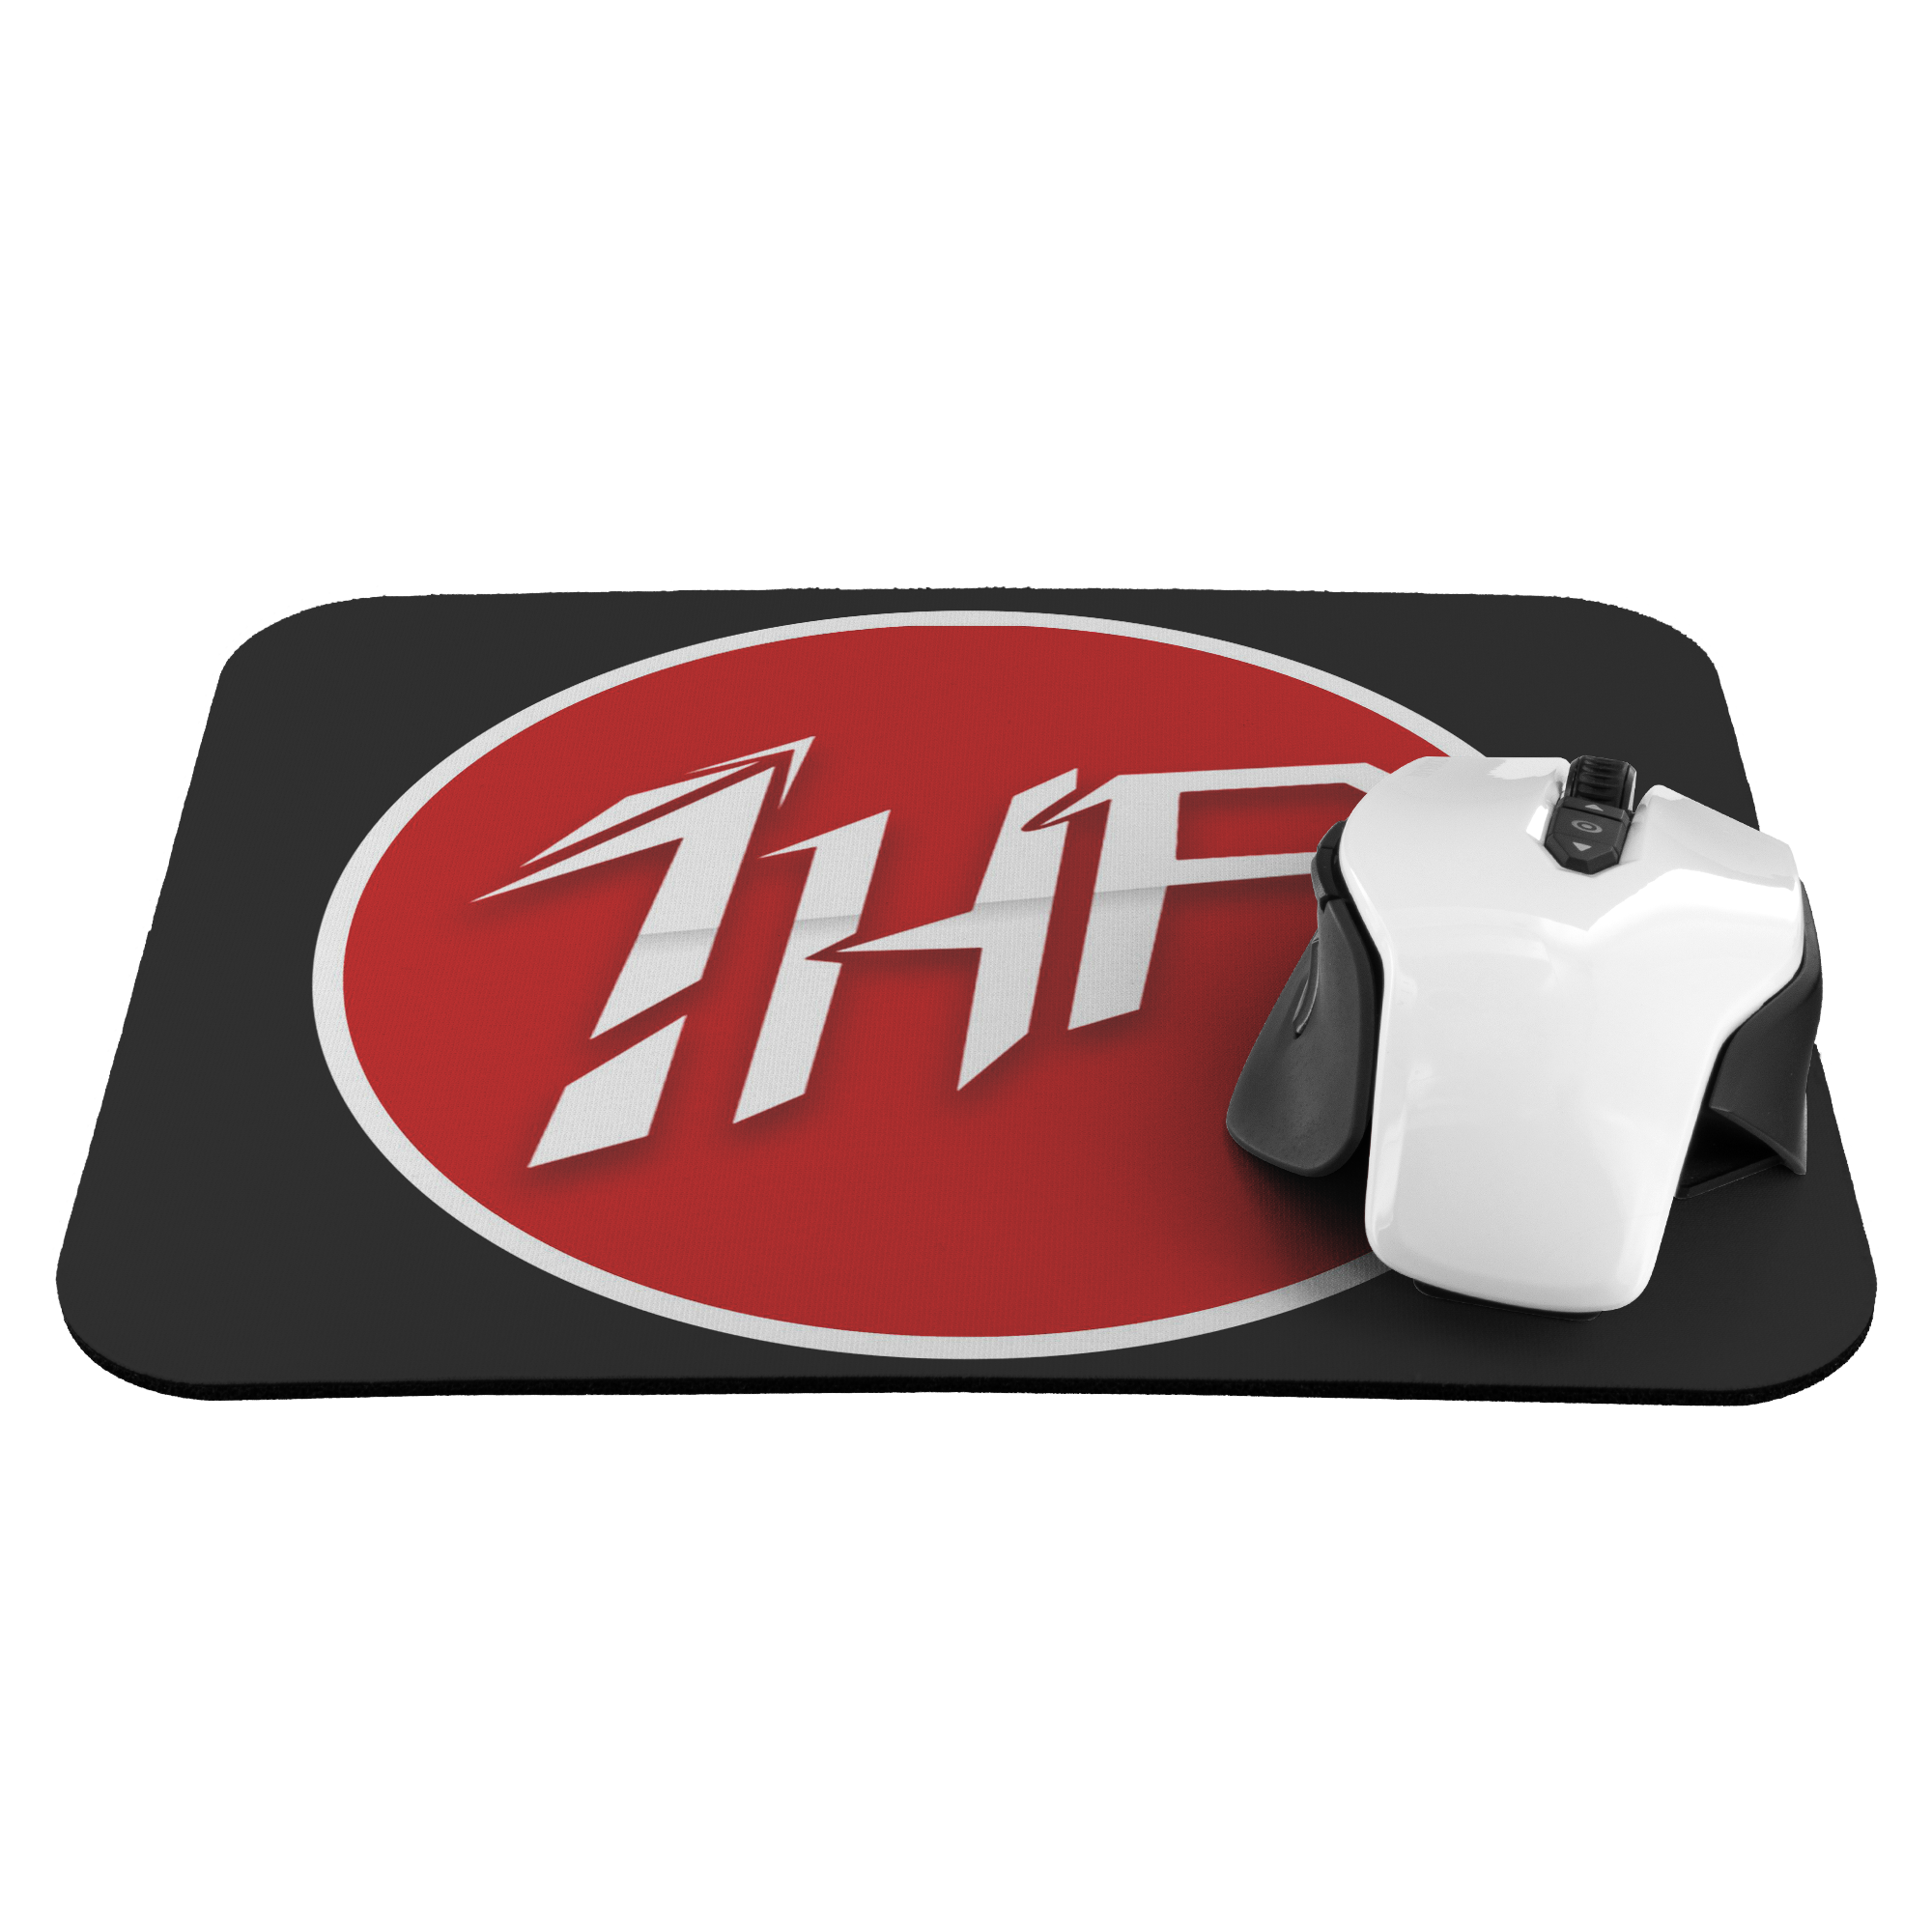 t-1hp MOUSE PAD